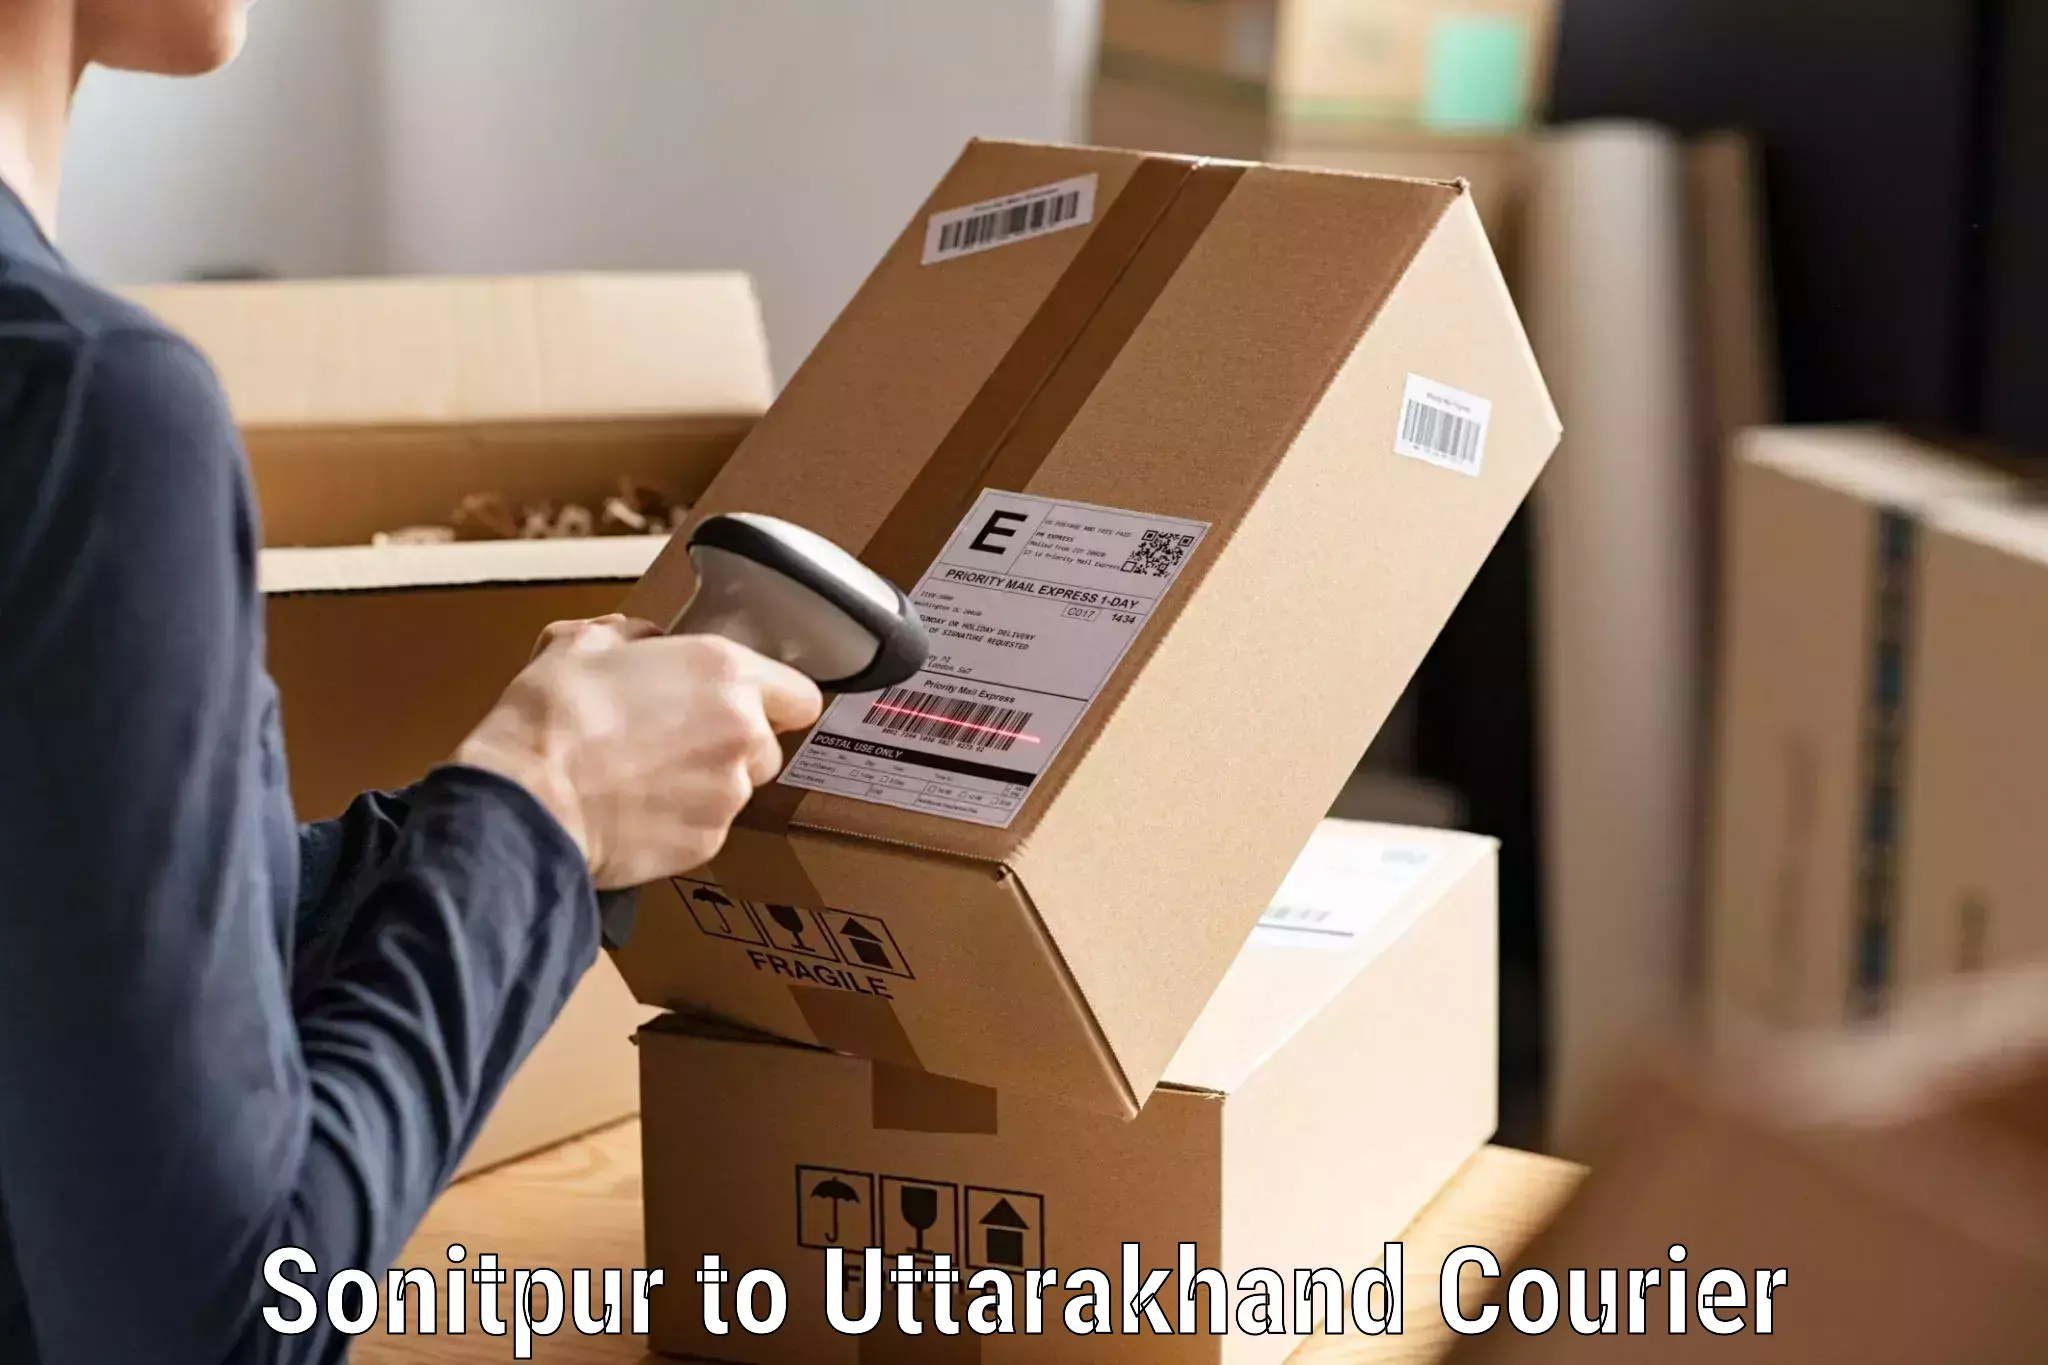 Dynamic courier operations Sonitpur to Haridwar